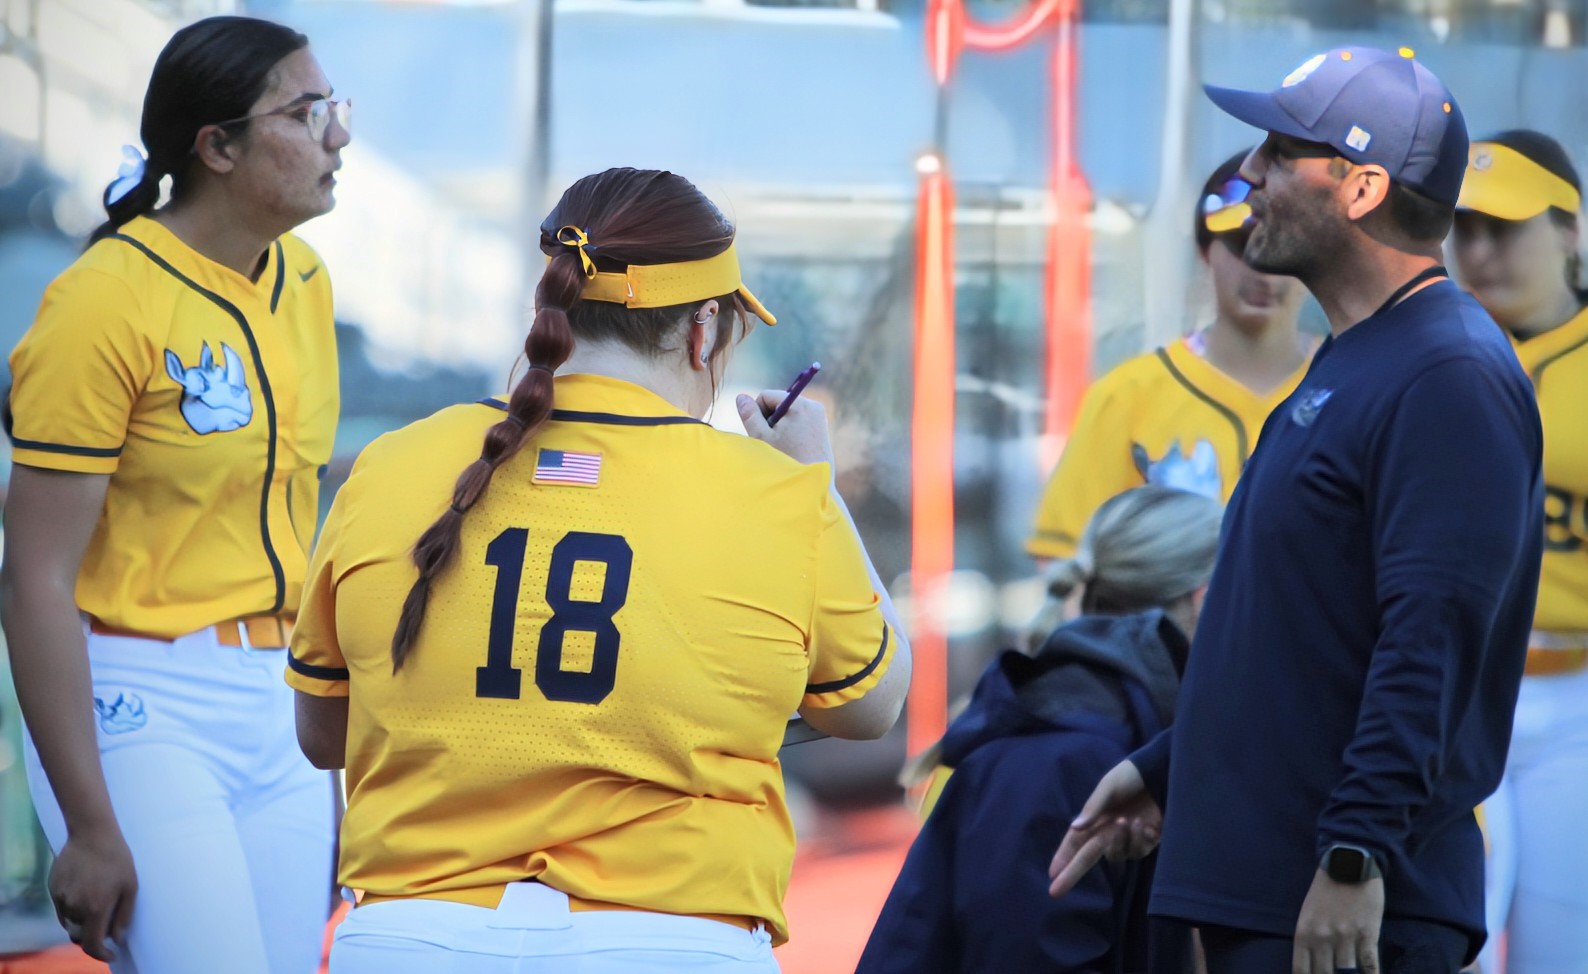 Gaston College coach Mike Steuerwald (right) discusses strategy with Abigail Gawlinski (left) and Tessa Hunt (18) during a game earlier this season.